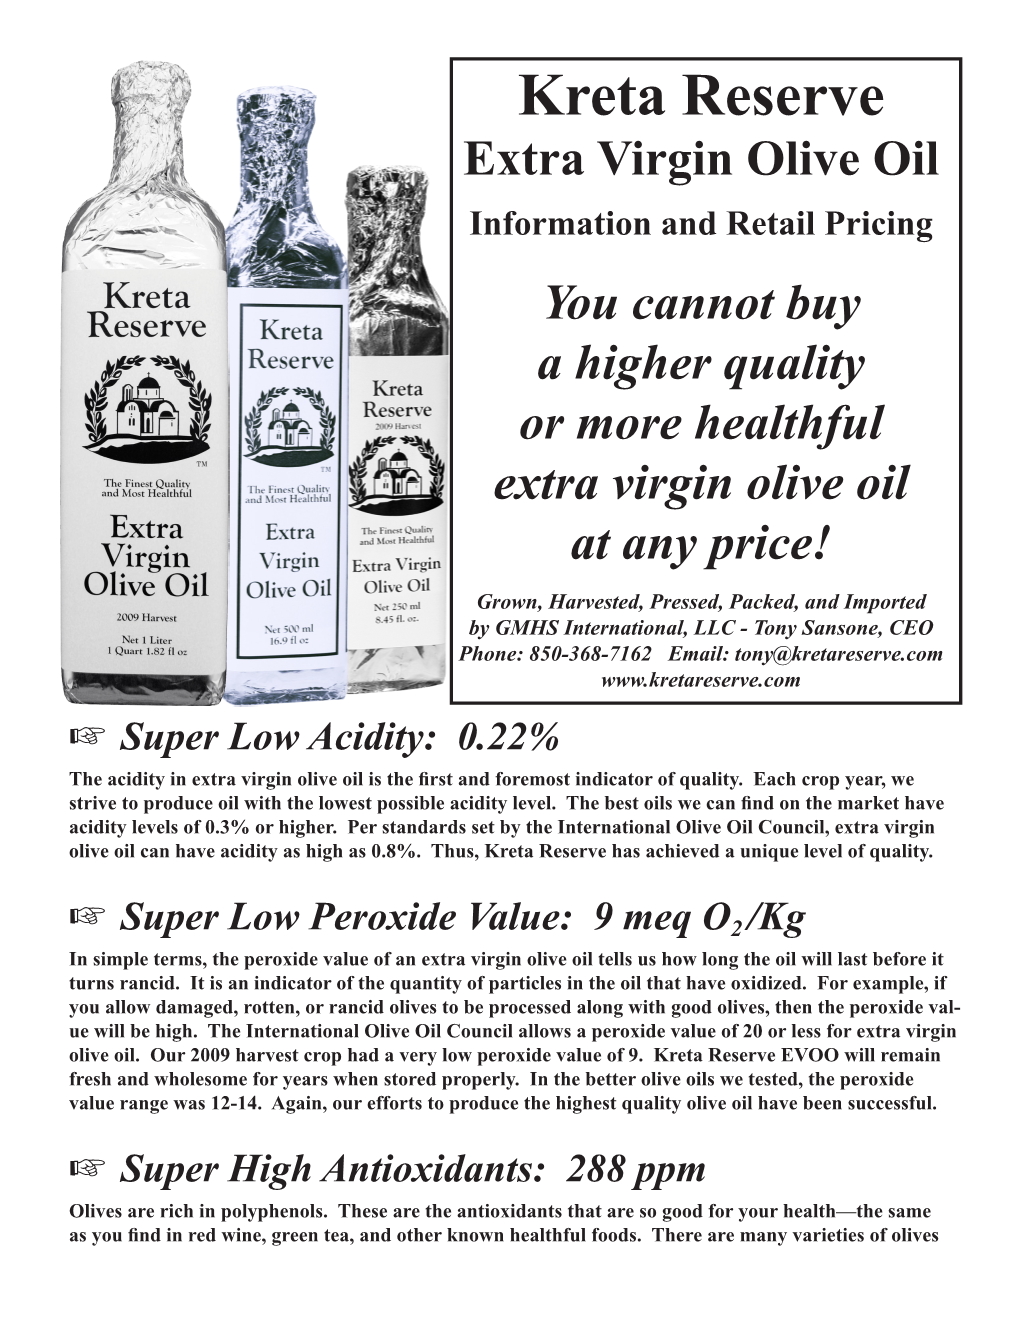 Kreta Reserve Extra Virgin Olive Oil Information and Retail Pricing